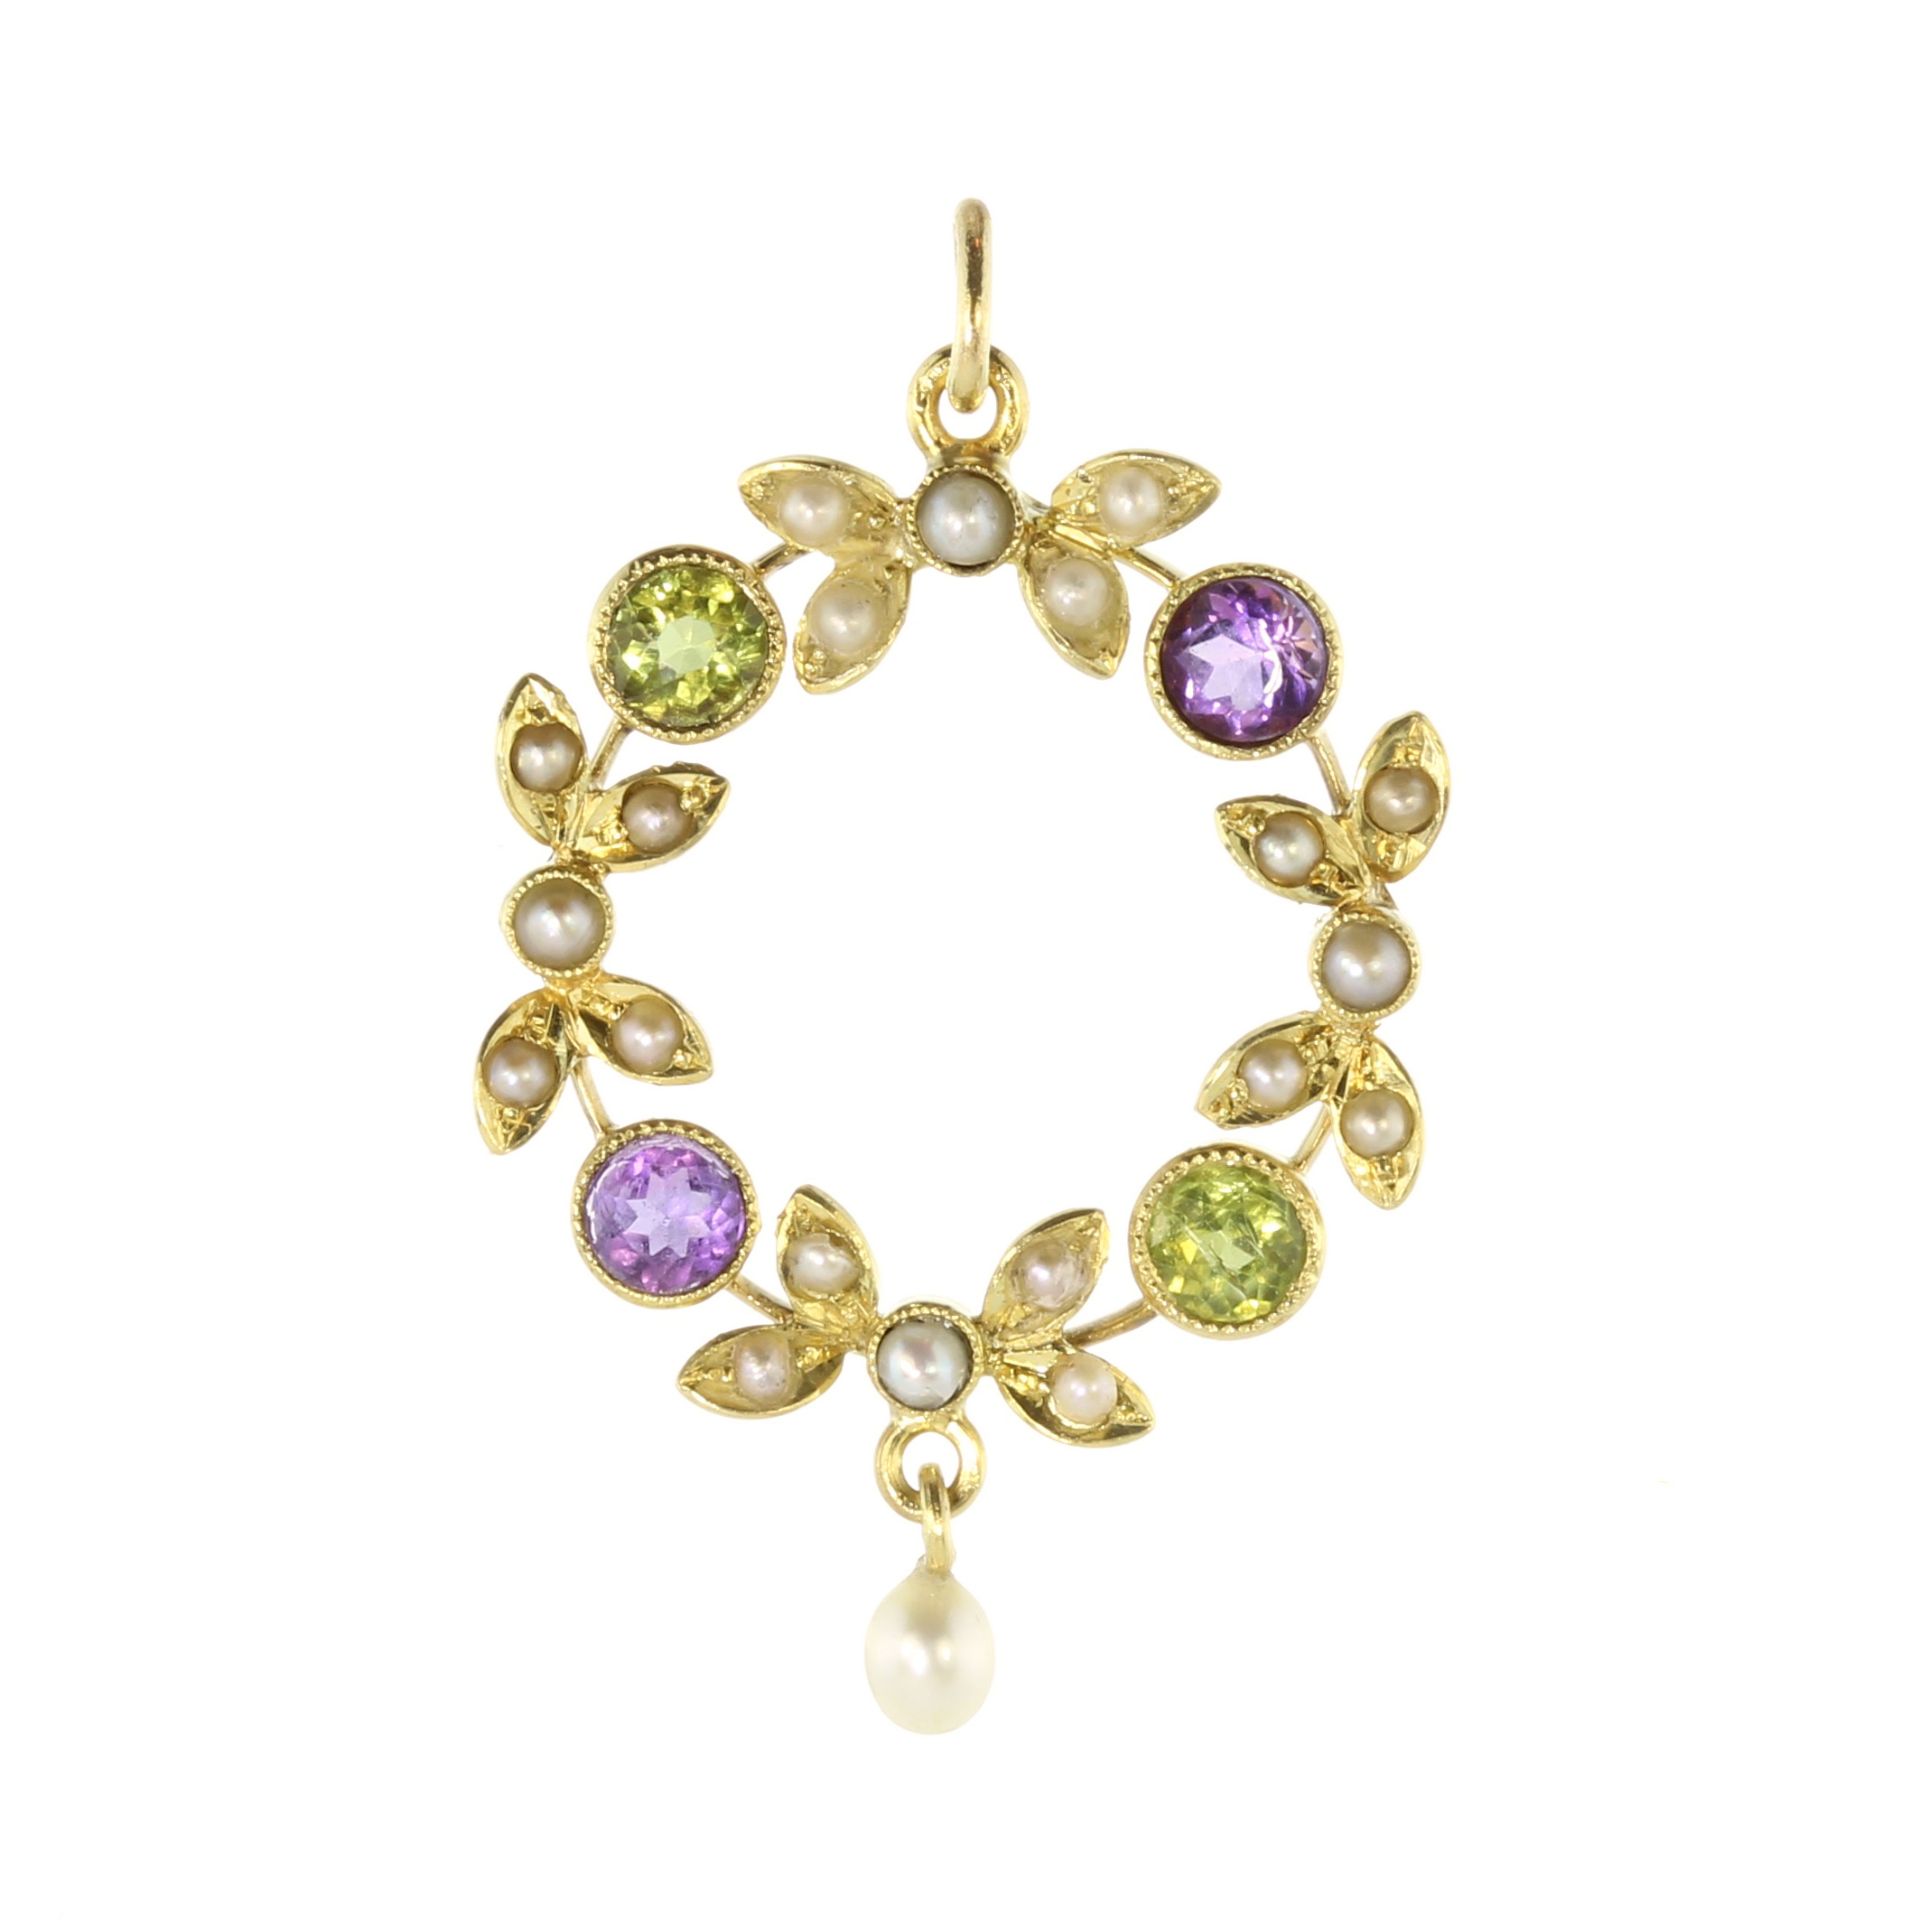 An early 20th Century jewelled Suffragette brooch in 15ct yellow gold (unmarked), set with round cut